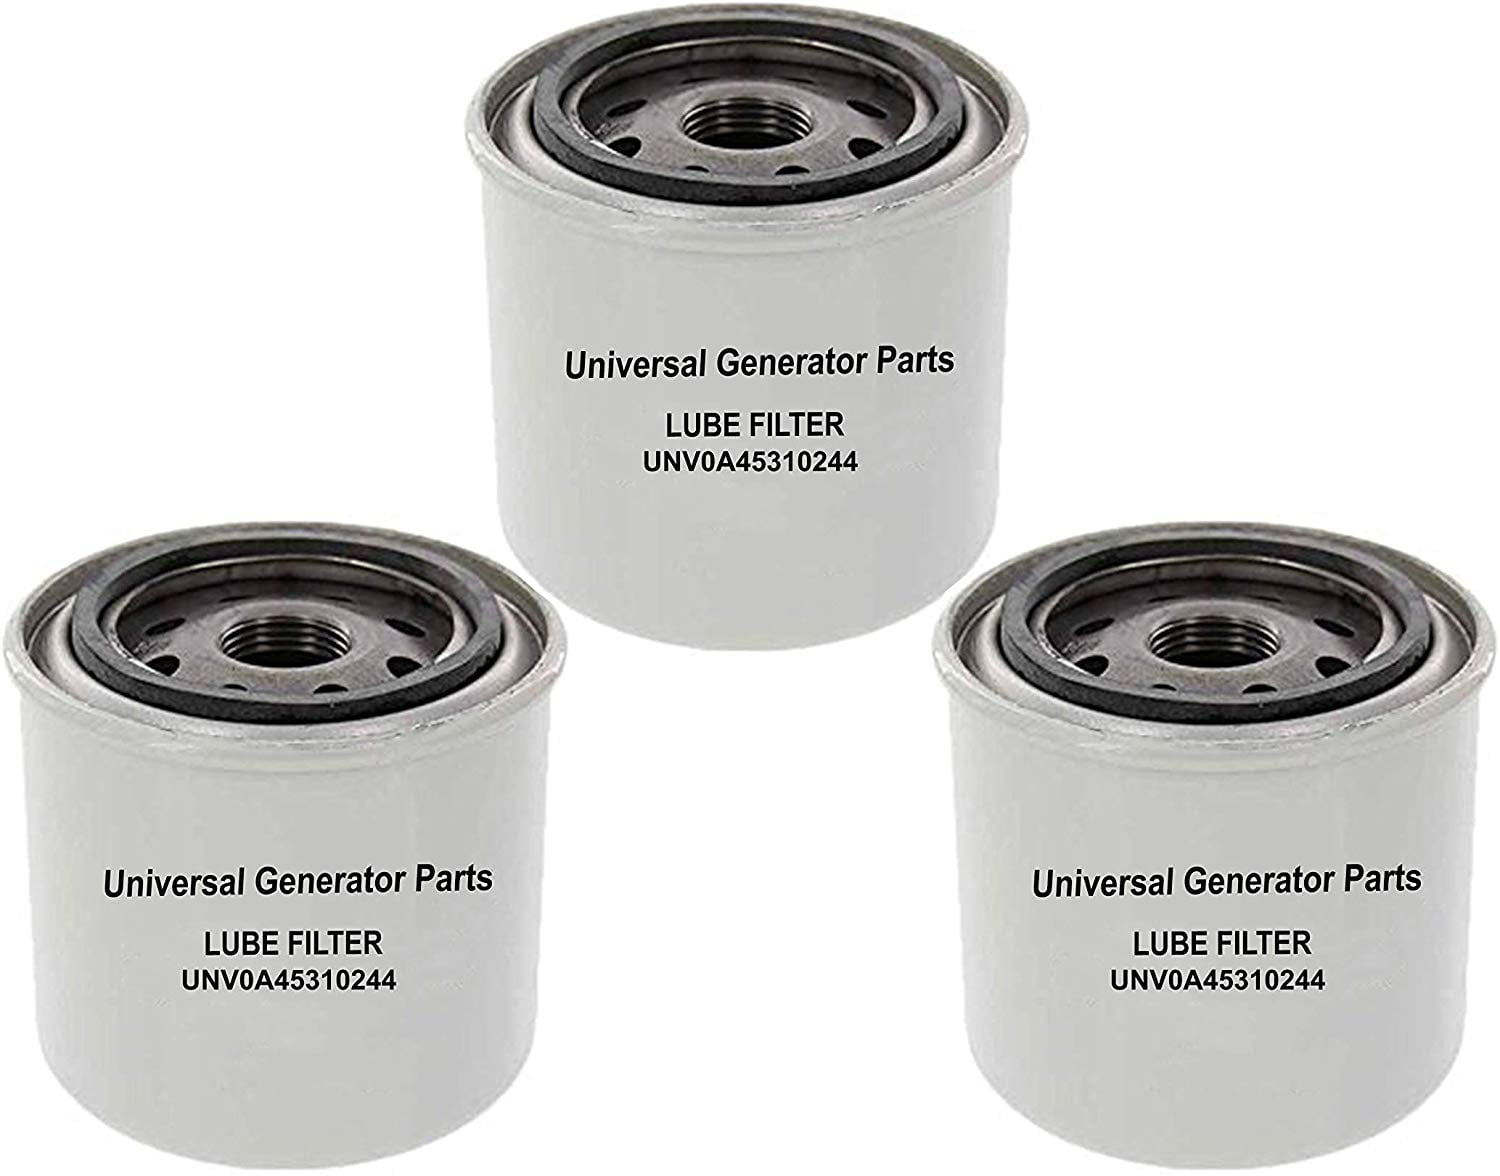 3 Pack Universal Generator Parts Replacement for Generac 0A45310244 